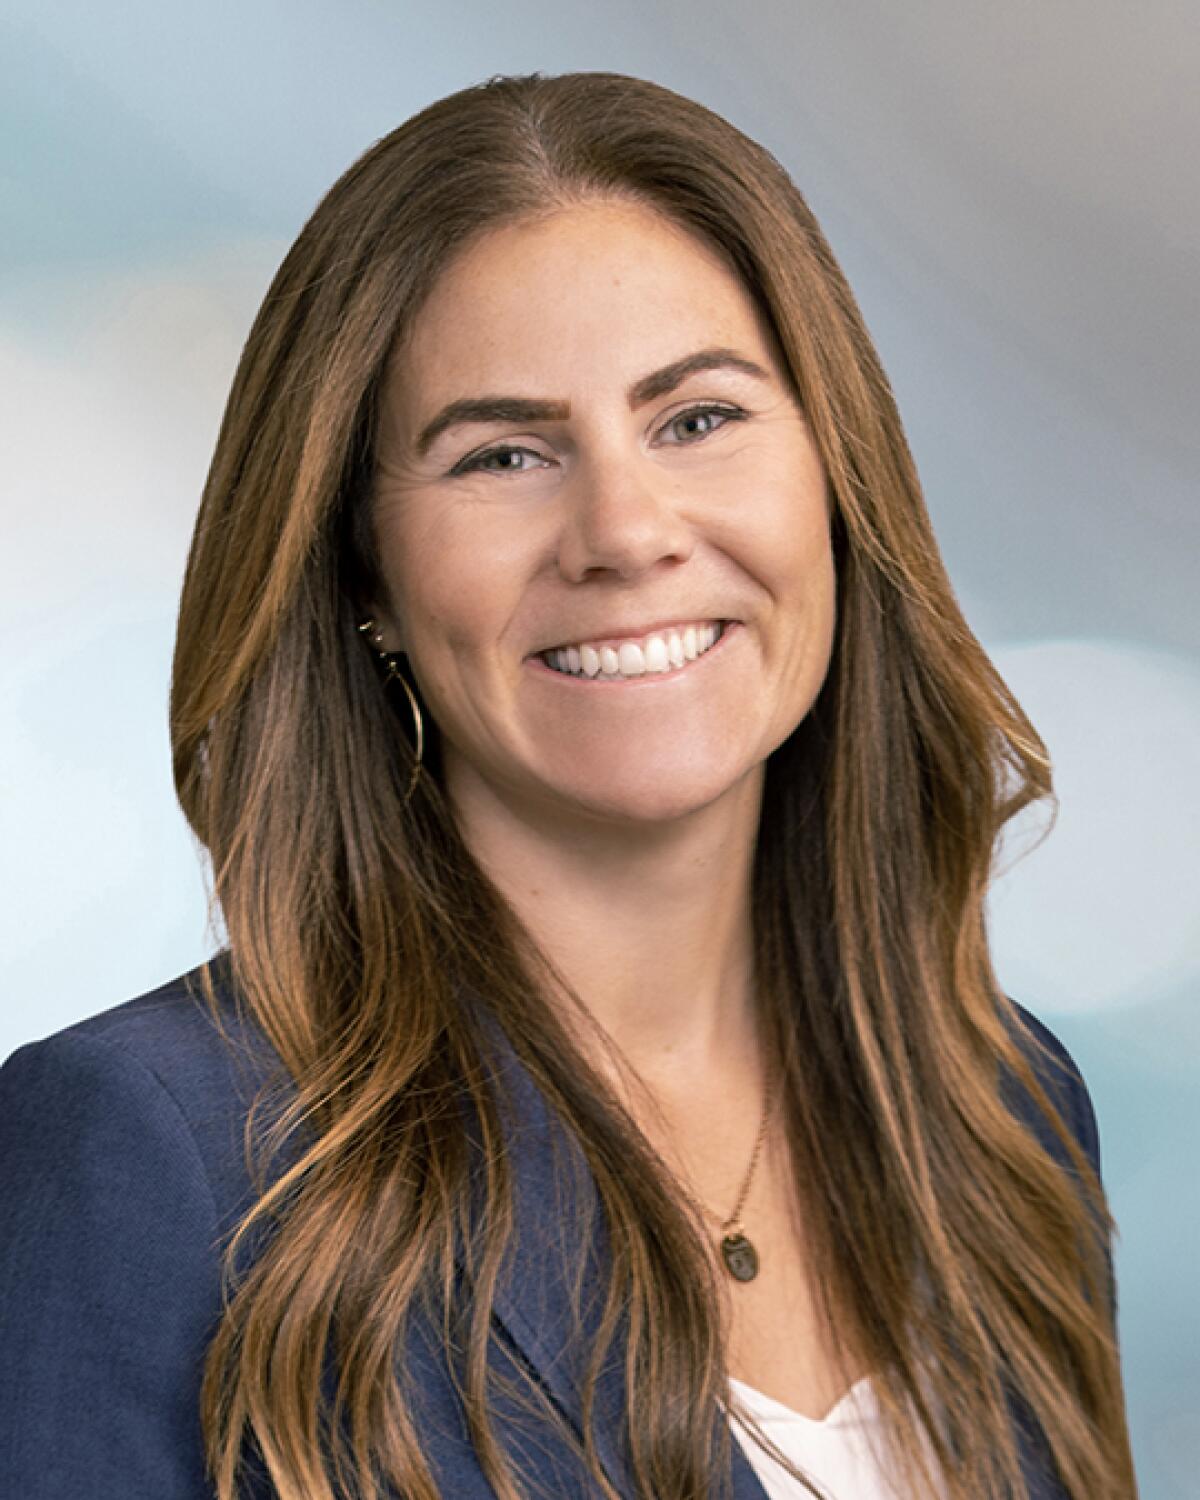 Megan Garibaldi has been appointed as the city attorney for Laguna Beach.